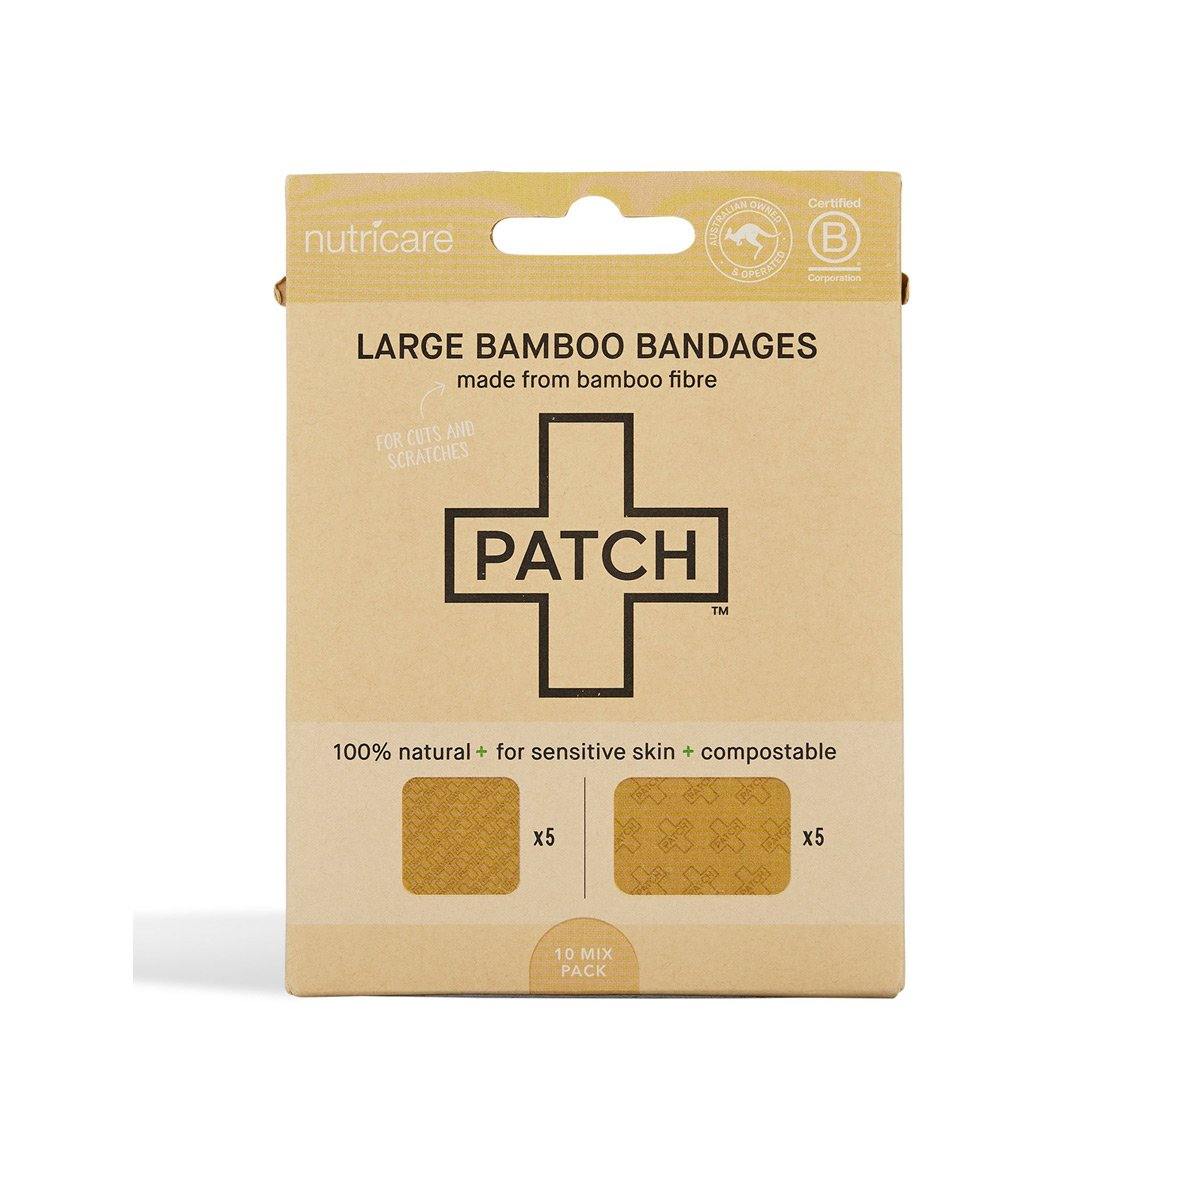 PATCH Large Bandage Natural Packaging Front